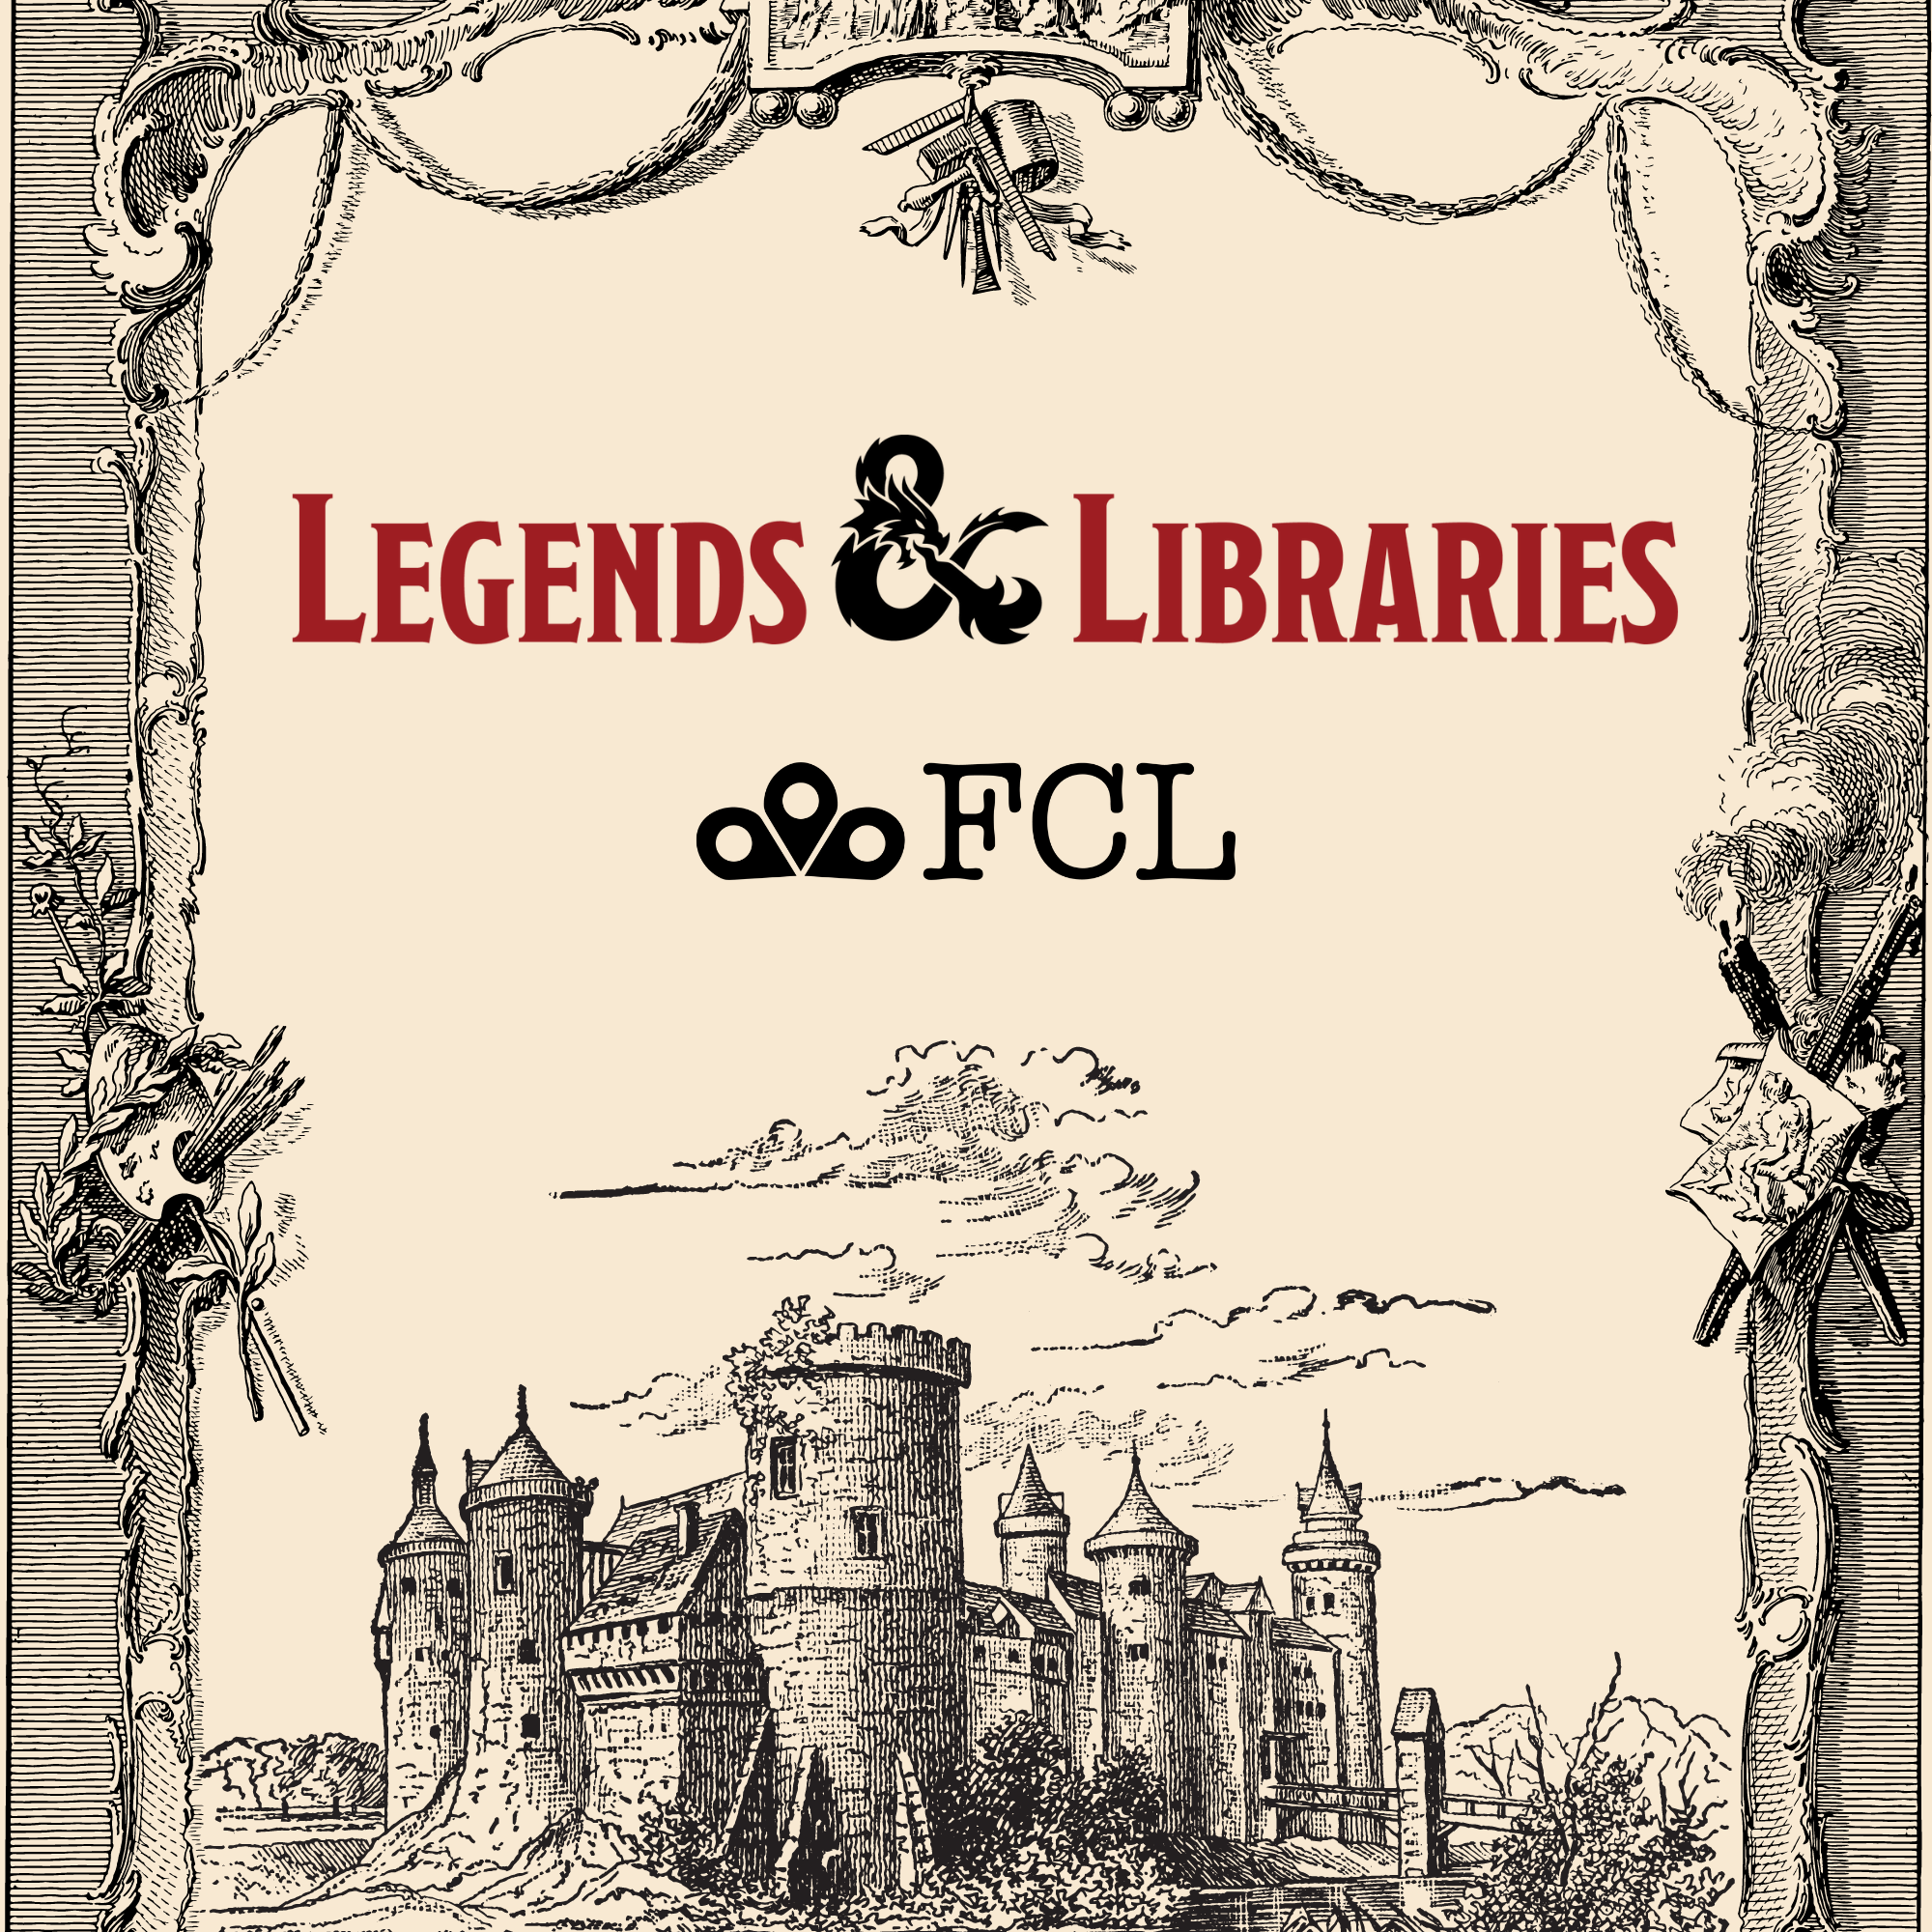 Legends & Libraries @ FCL